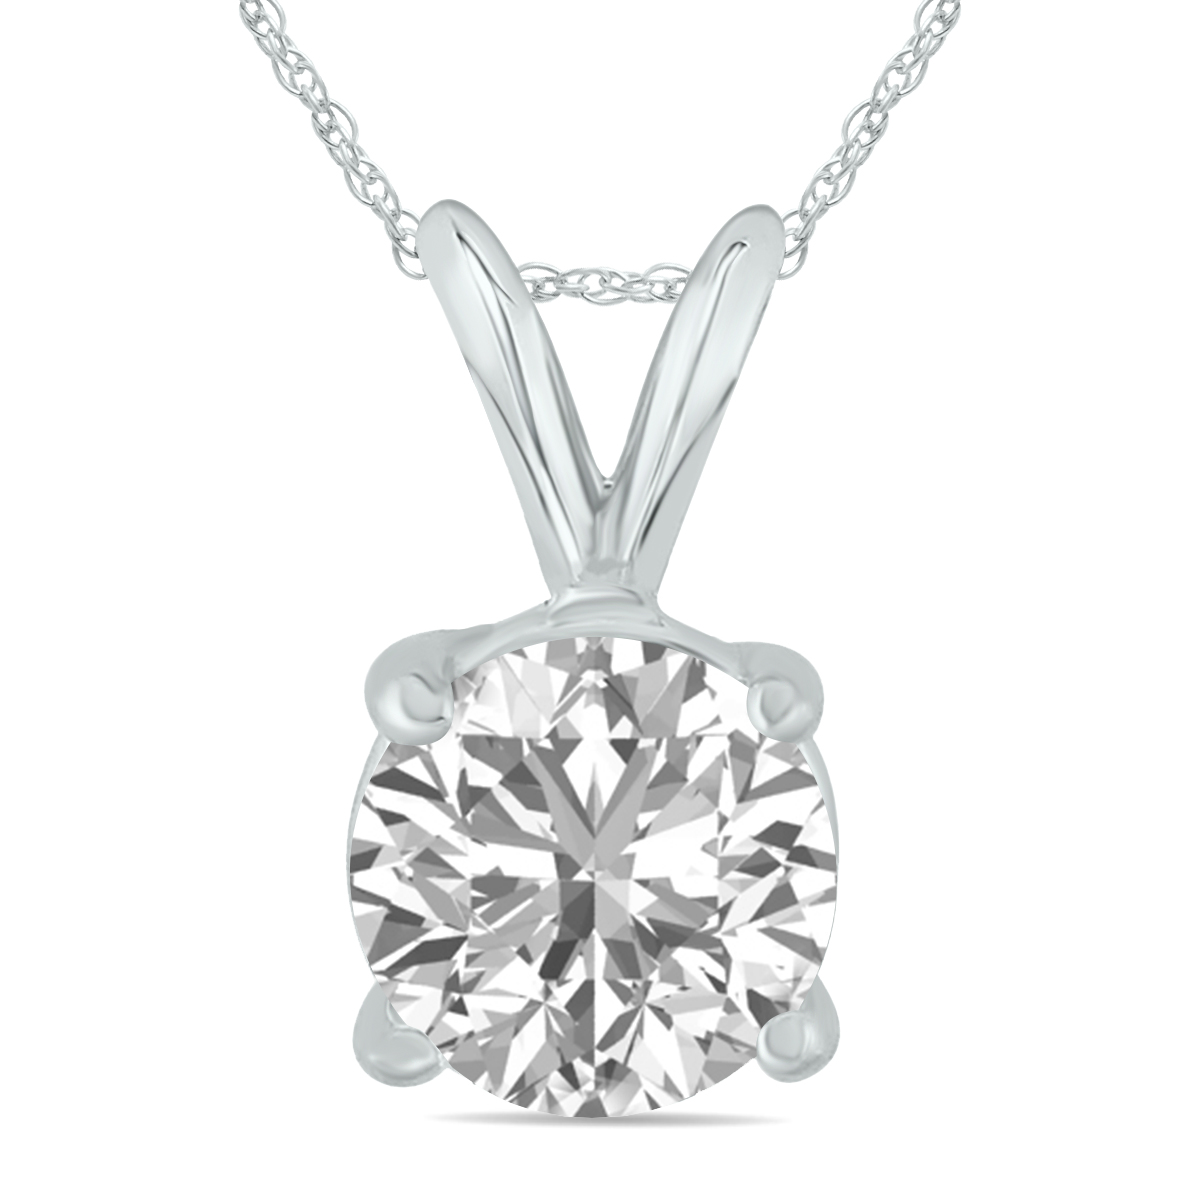 Image of IGI Certified Lab Grown 1 1/4 Carat Diamond Solitaire Pendant in 14K White Gold (J Color SI2 Clarity)